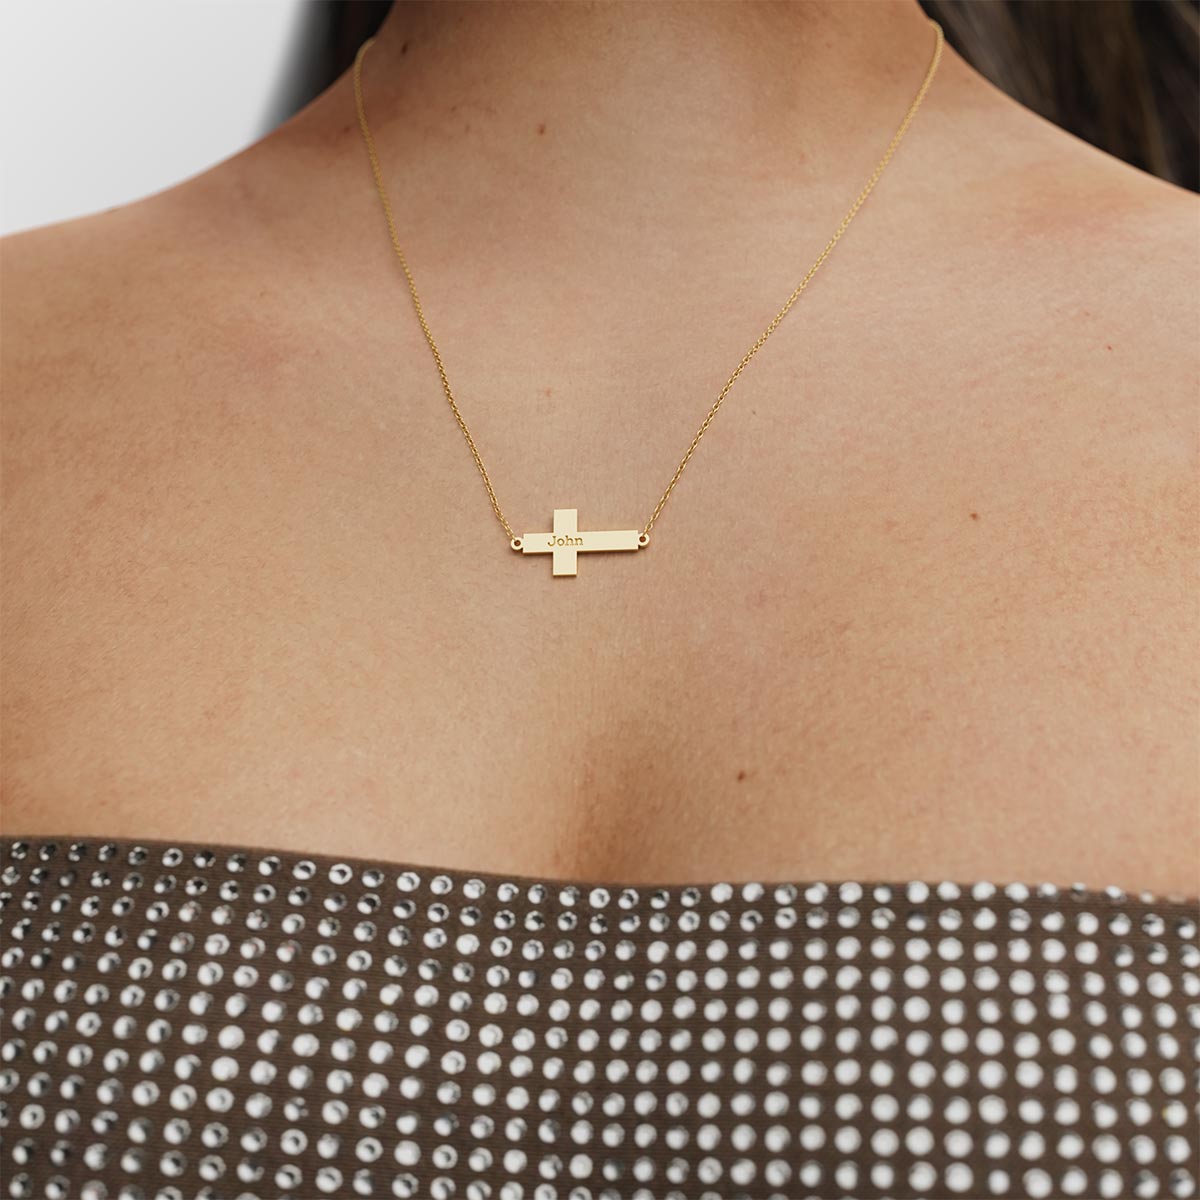 Personalized Horizontal Modern Cross Necklace with Name Engraving